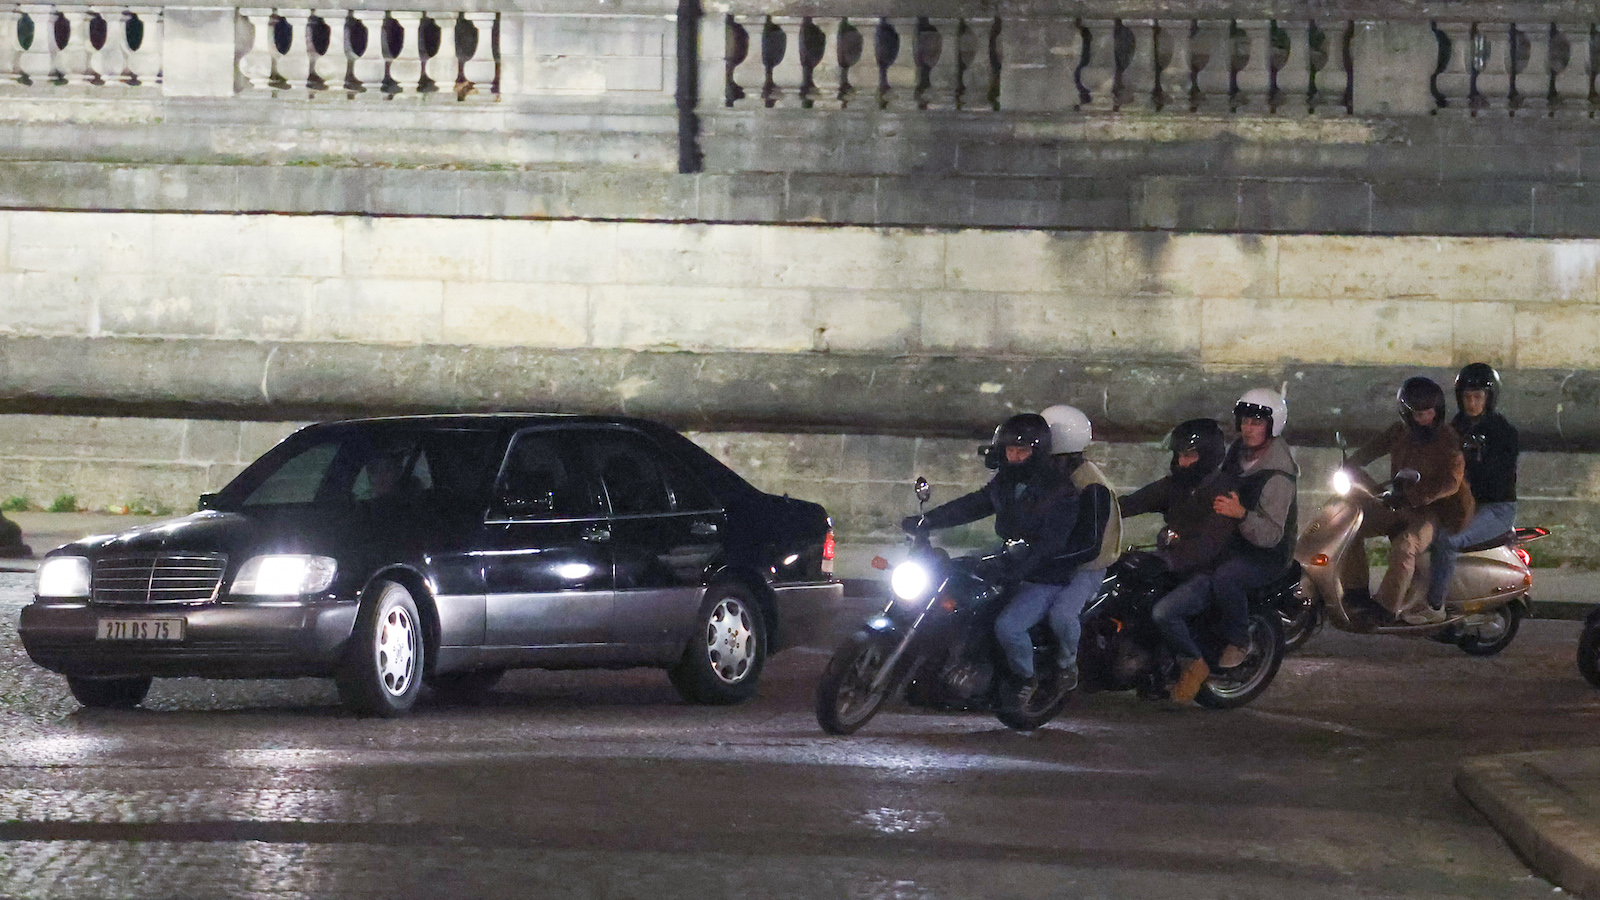 ‘The Crown’ S6 Filming In Paris Is The Grimmest Thing You’ll See This Week